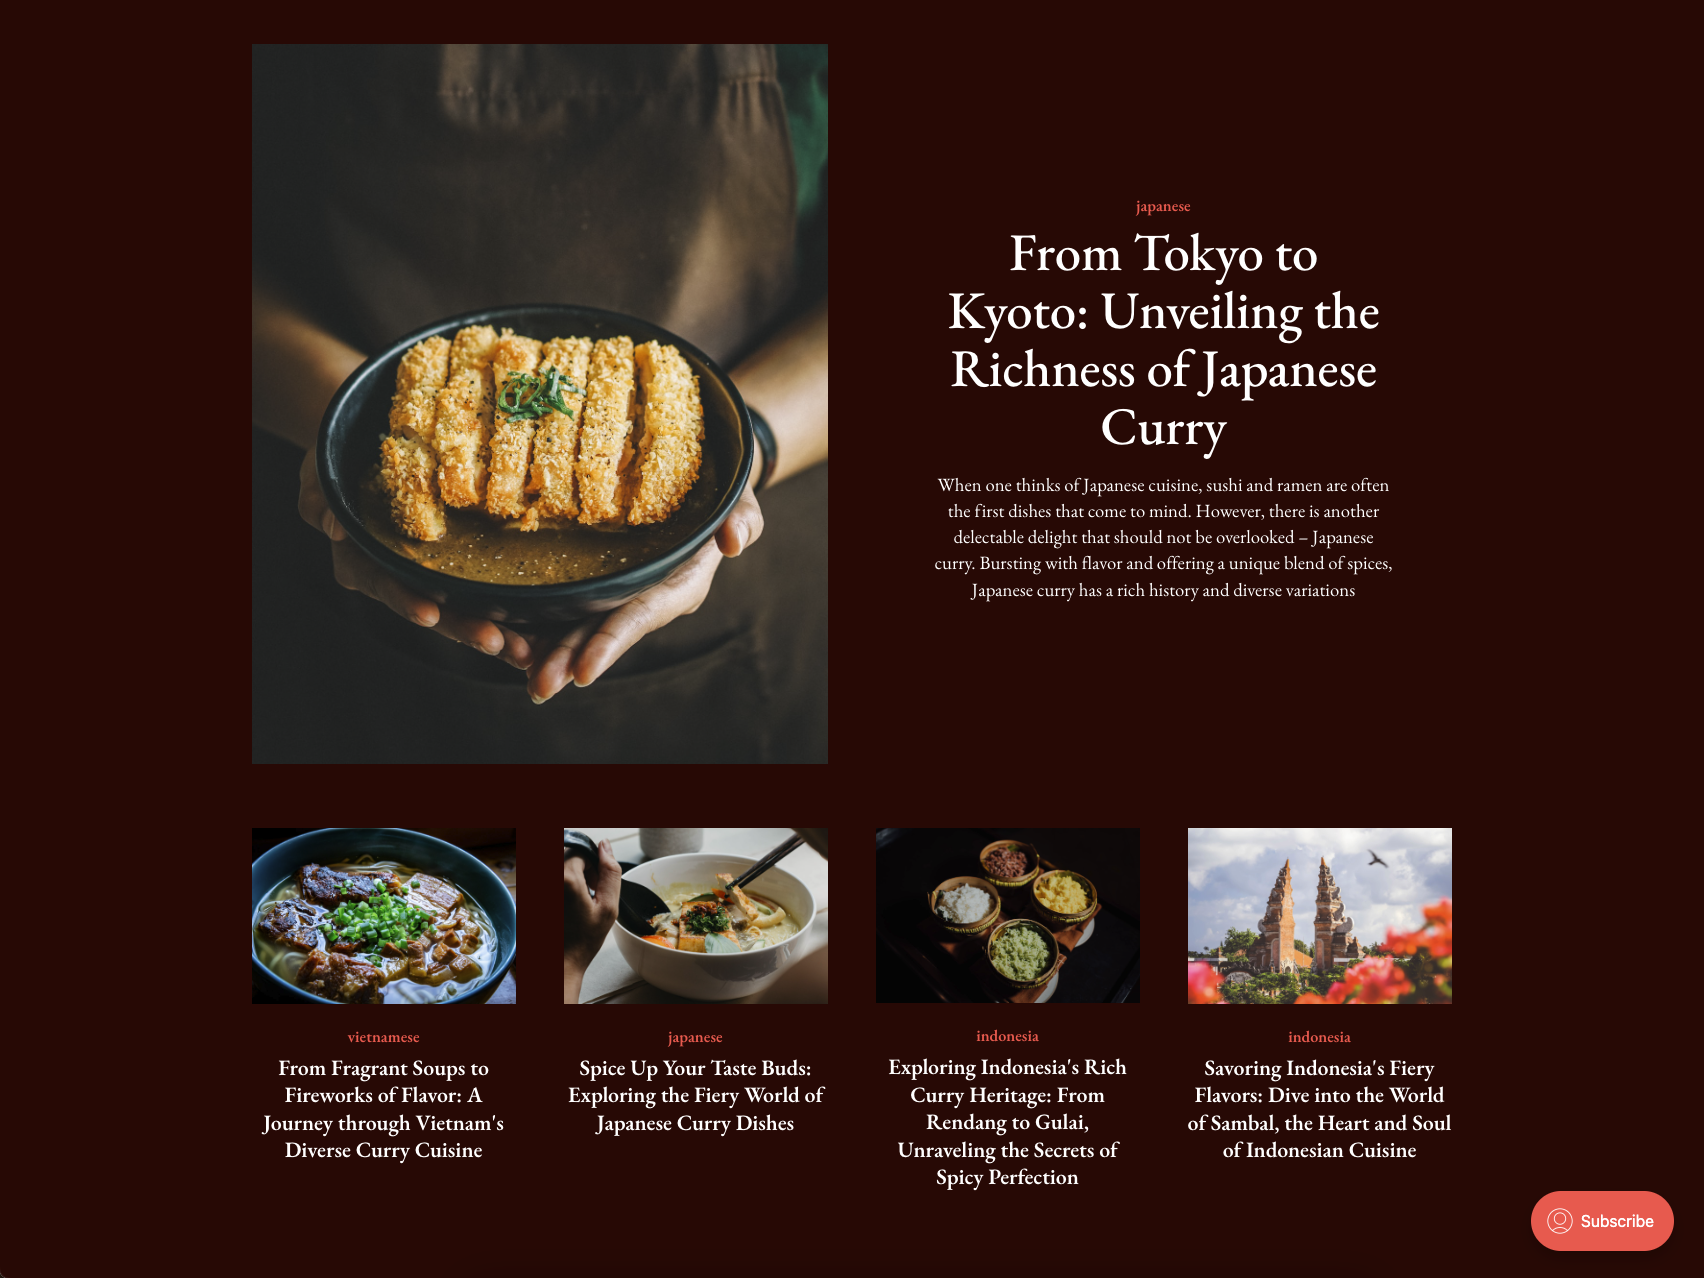 A food website showing different elaborate articles on curry